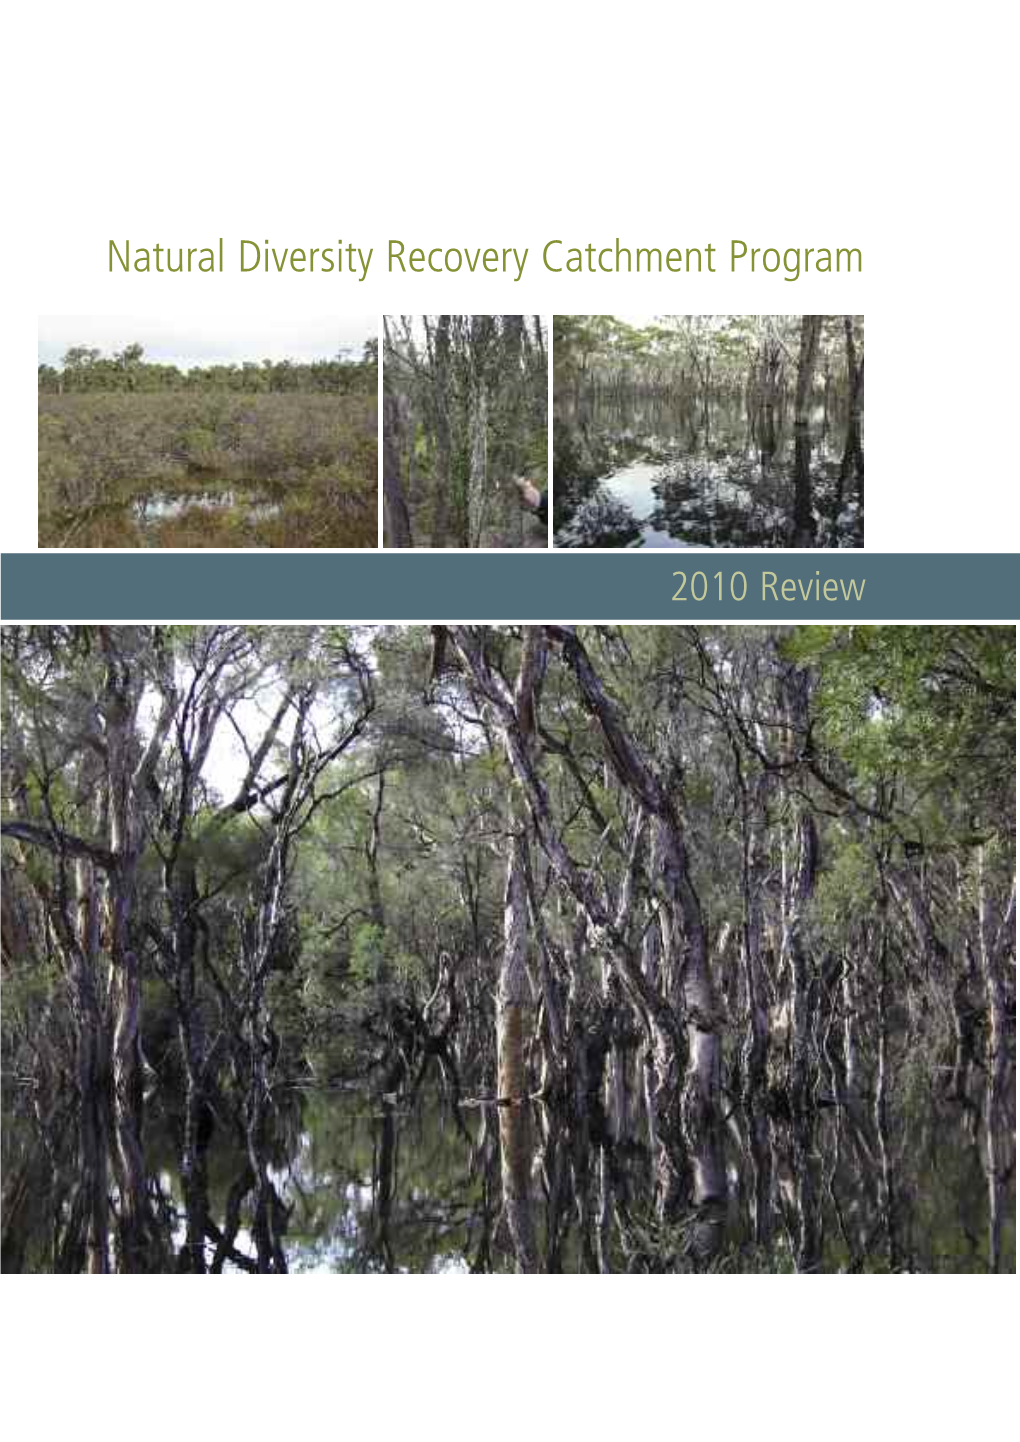 Natural Diversity Recovery Catchment Program